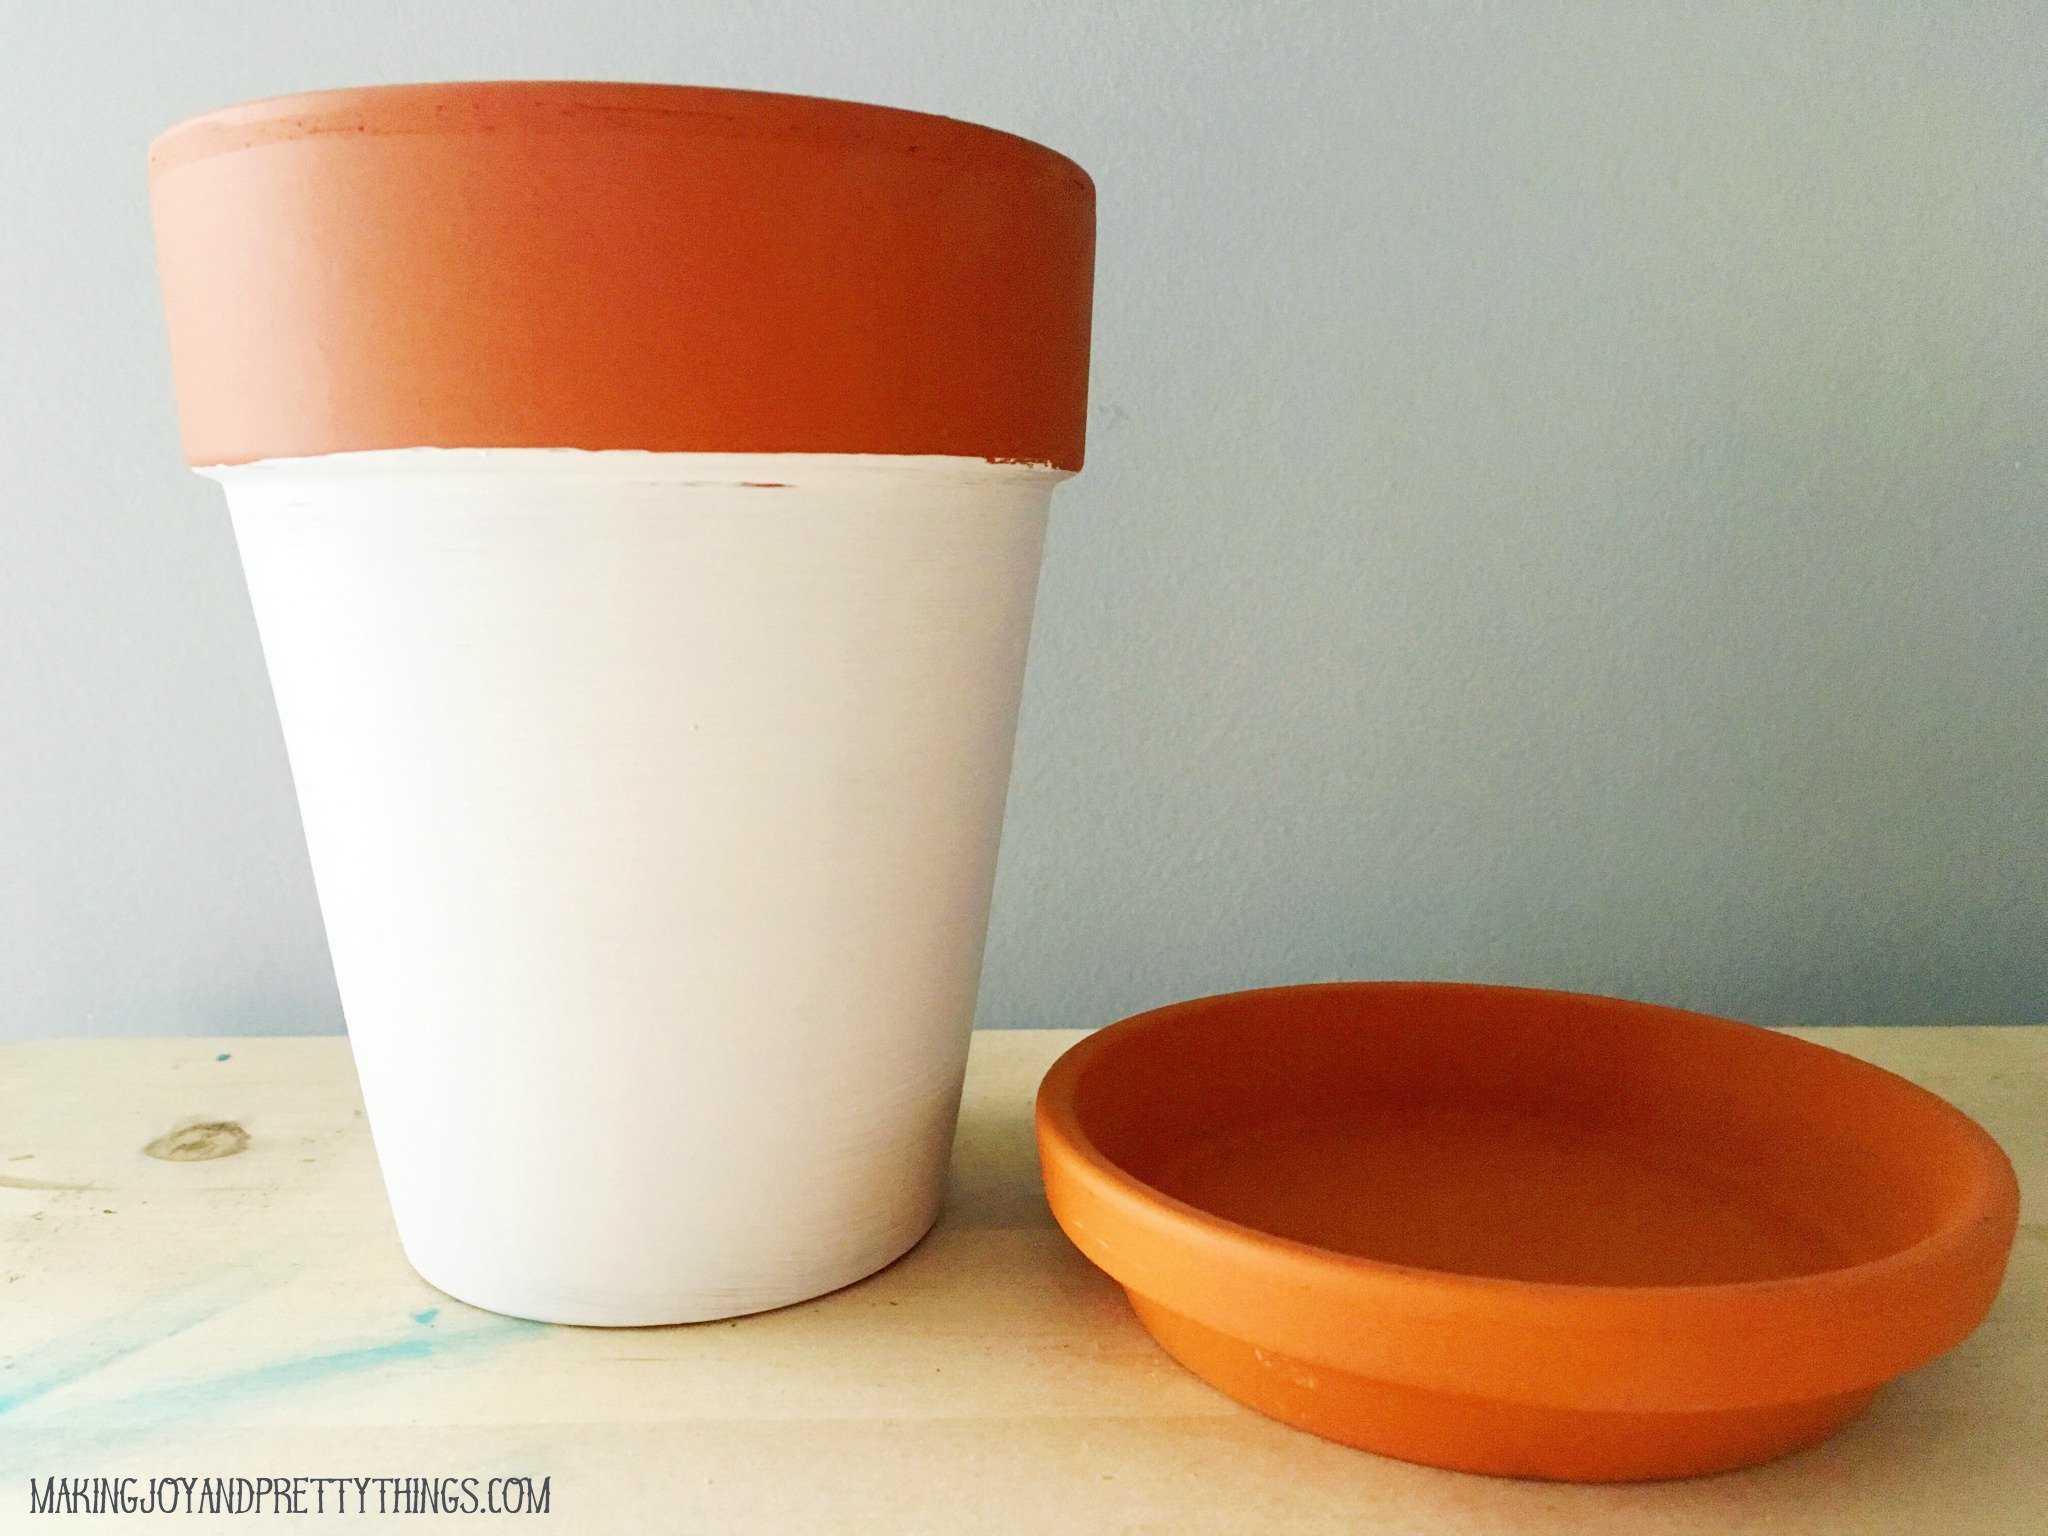 A terra cotta planter with a separate saucer. The bottom half of the pot is painted white, while the top rim and saucer remain a natural terra cotta color.